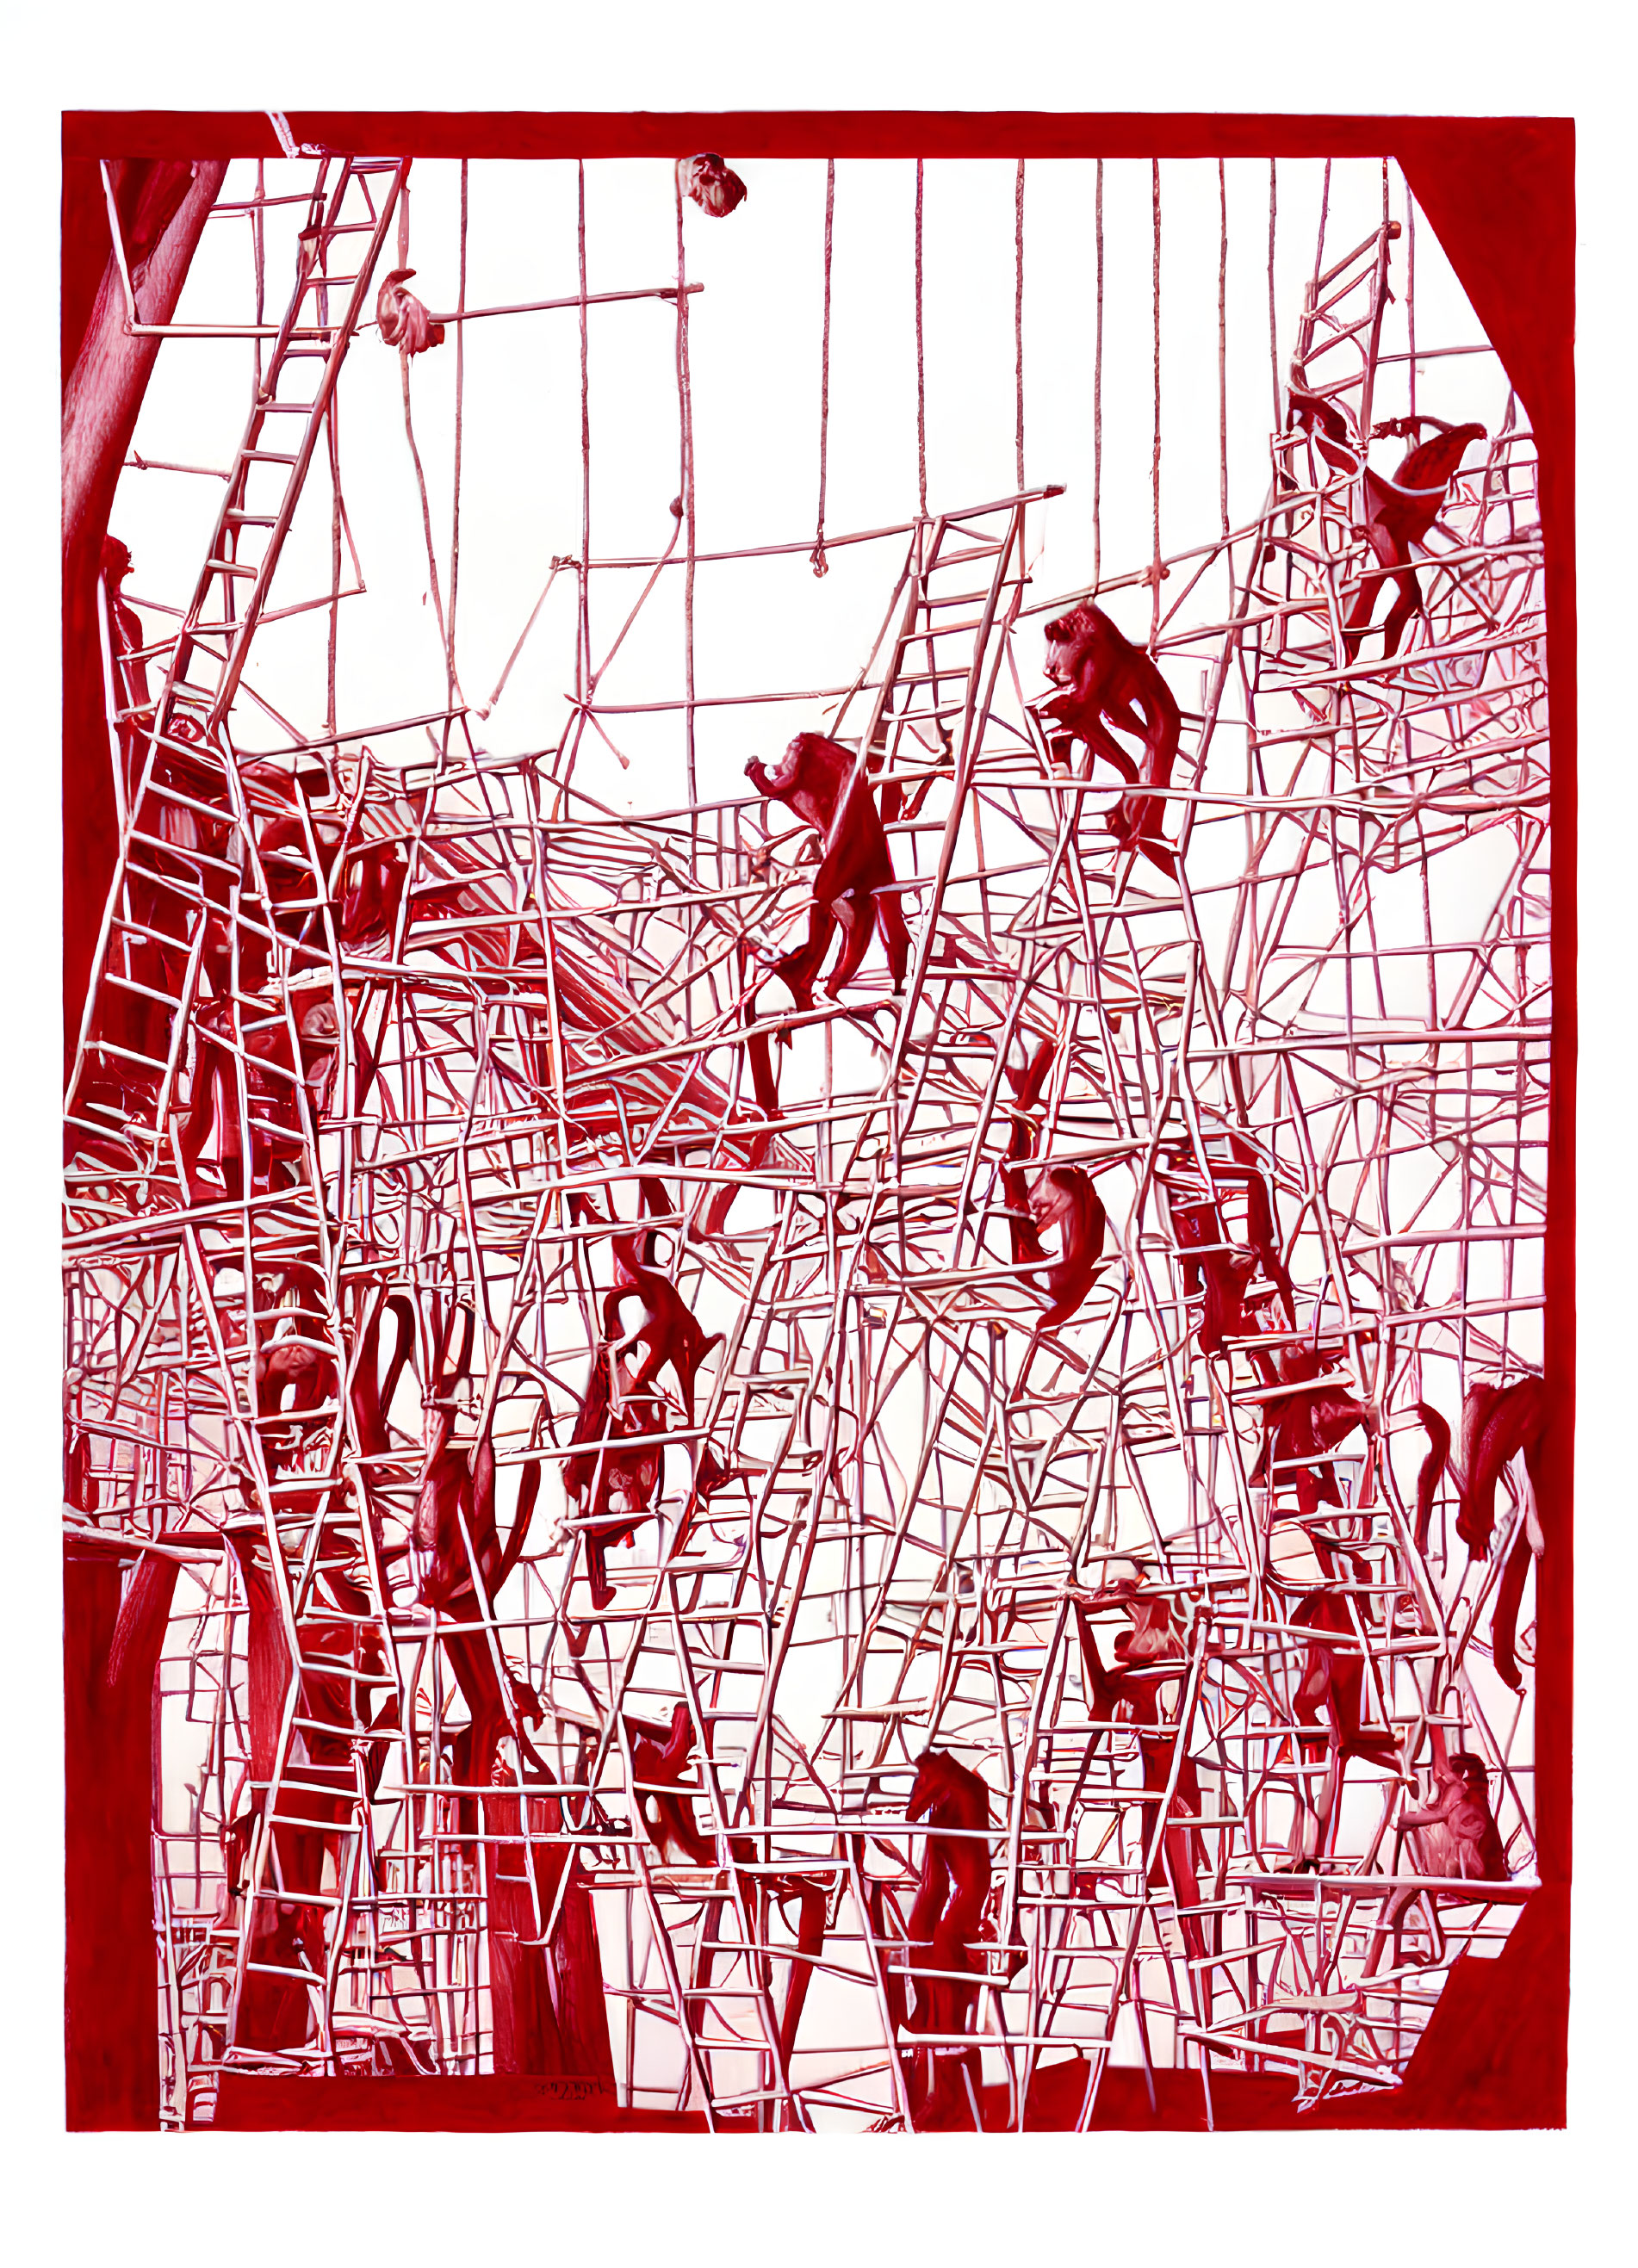 People navigating interconnected ropes and bars in red-tinted playground